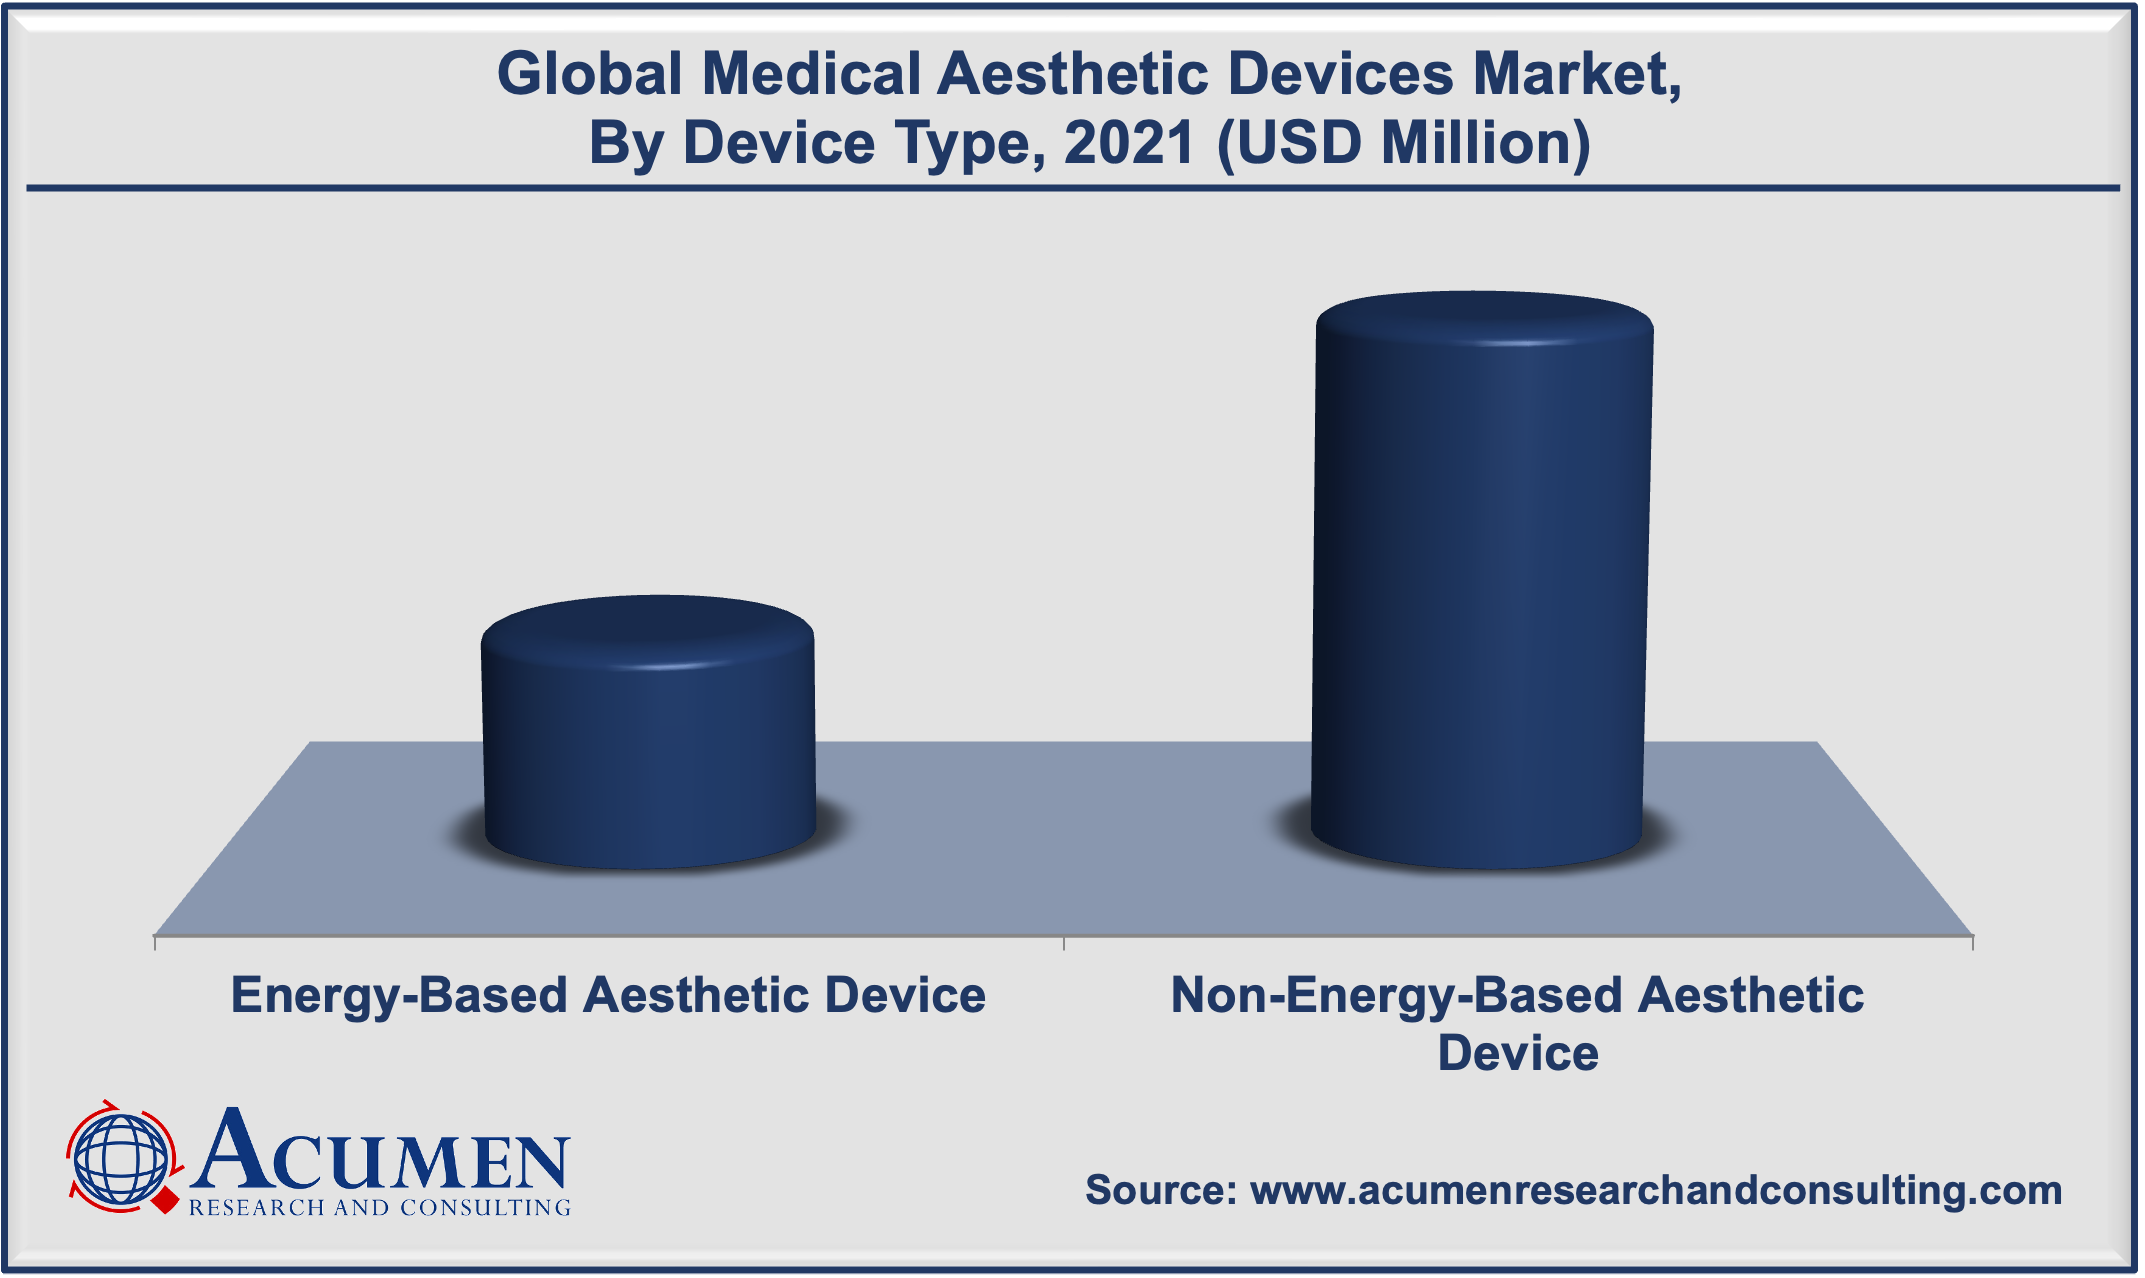 Medical Aesthetic Devices Market Share accounted for USD 14,980 Million in 2021 and is estimated to reach USD 36,341 Million by 2030.